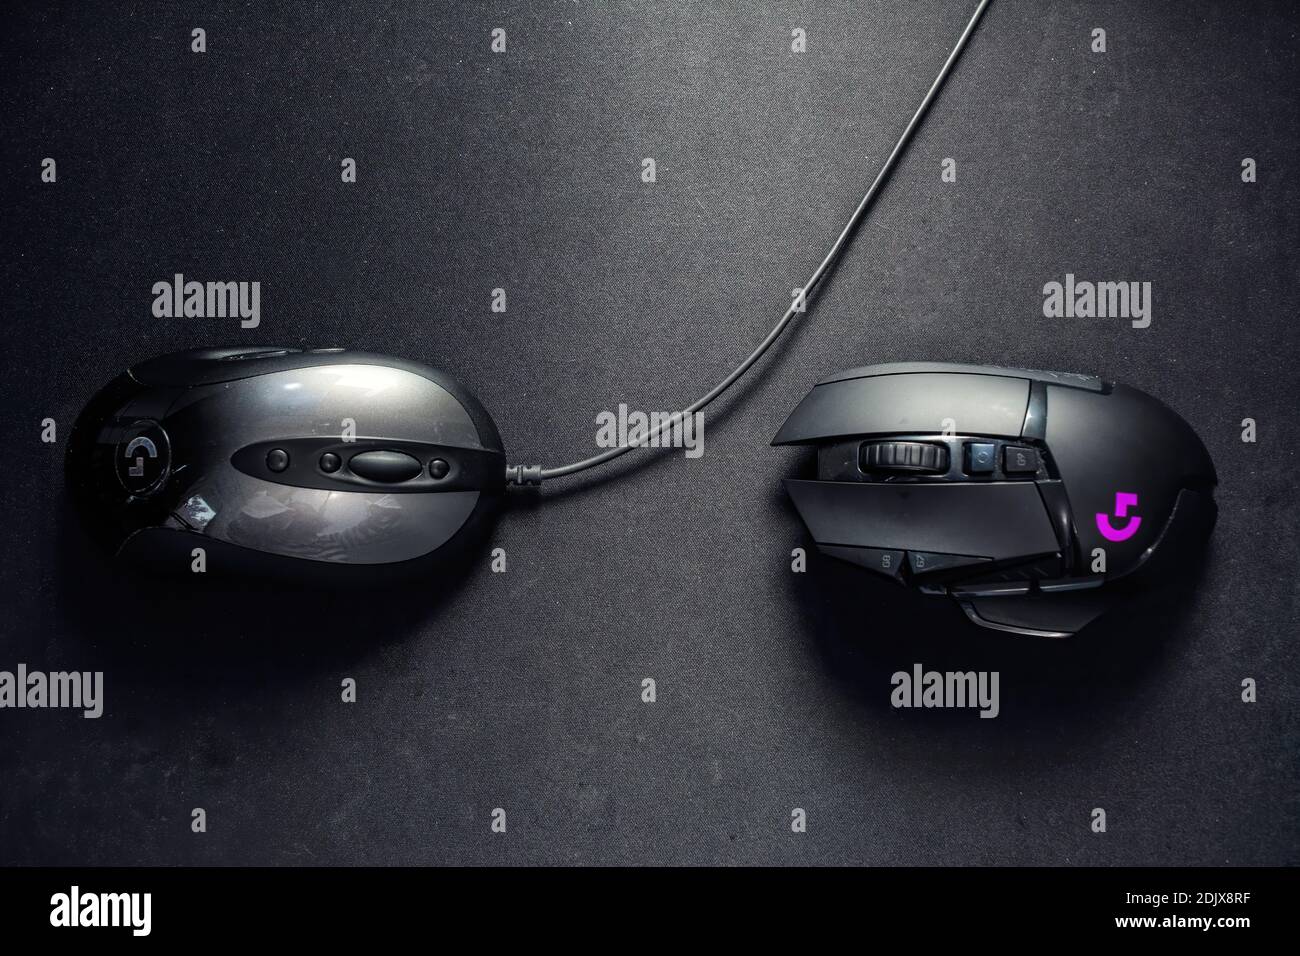 17 November 2020- Bucharest, Romania. The gaming mouse from Logitech G502  along with its older version G501 Stock Photo - Alamy